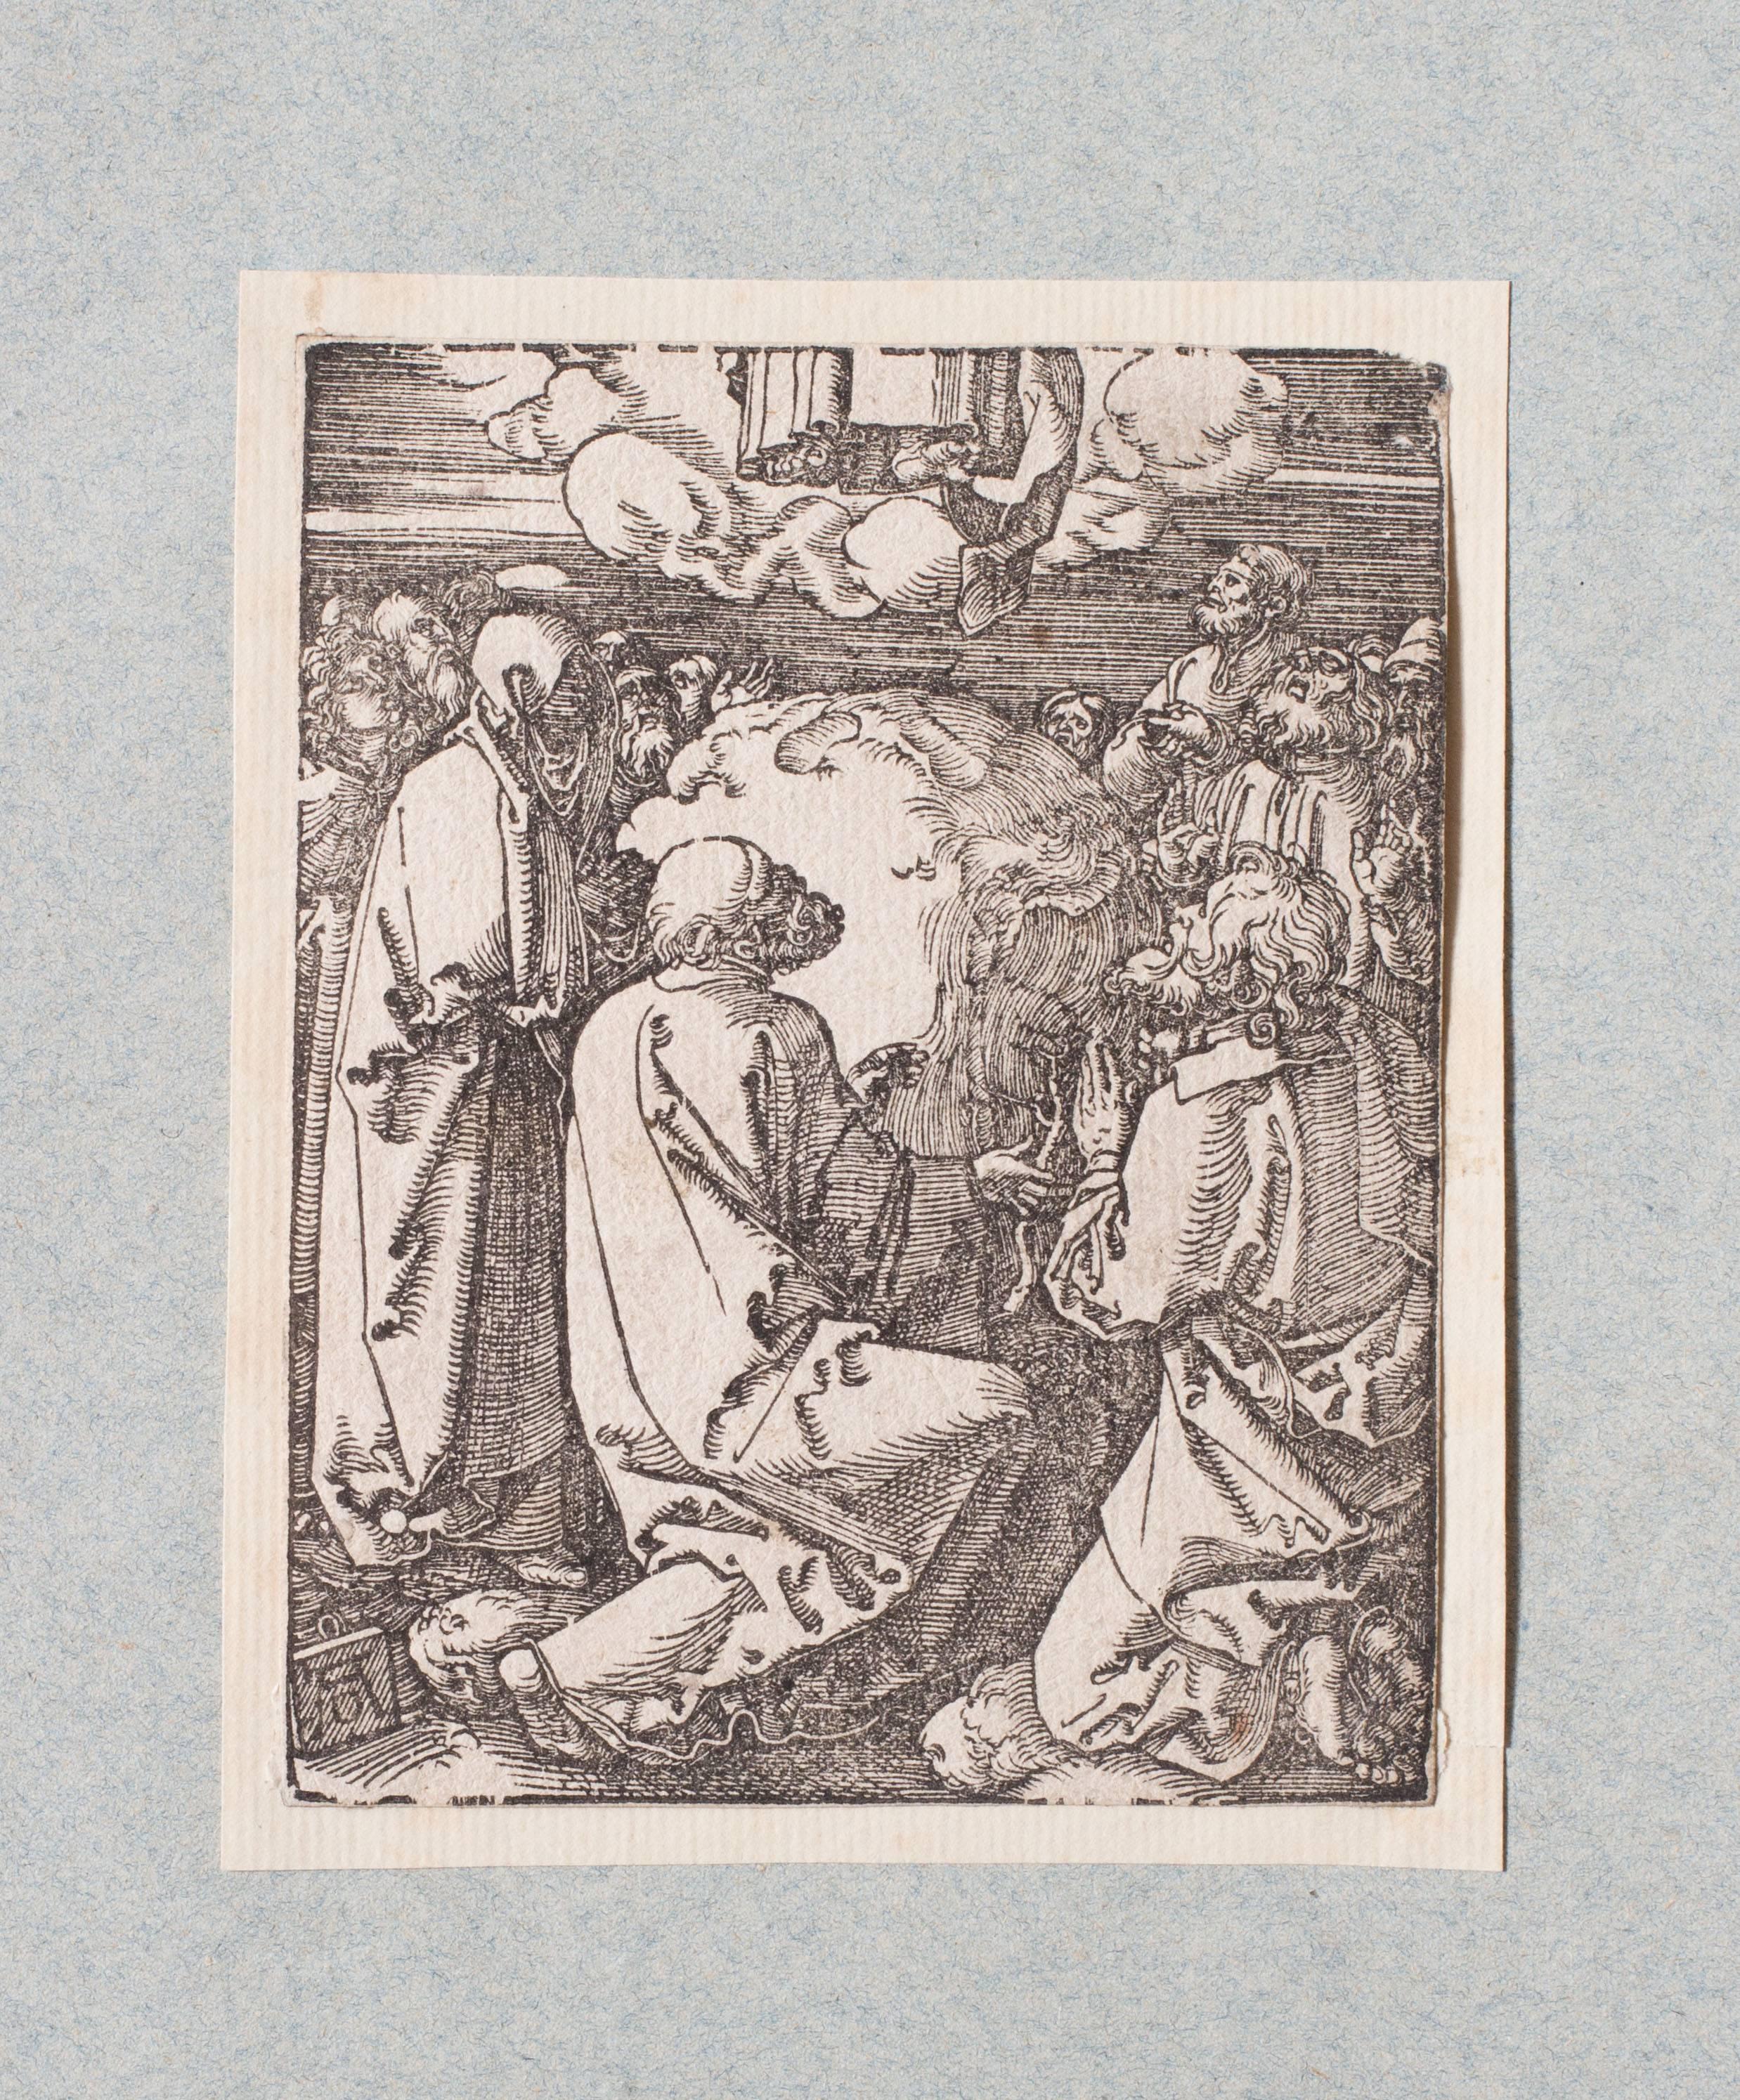 Albrecht Durer
'The Ascension' from 'The Small Passion'
Woodcut Engraving
A later version after the artist's death though indications are that this has good age
5 x 3.7/8in. (12.7 x 10cm.)

This woodcut engraving was originally executed in 1511 from